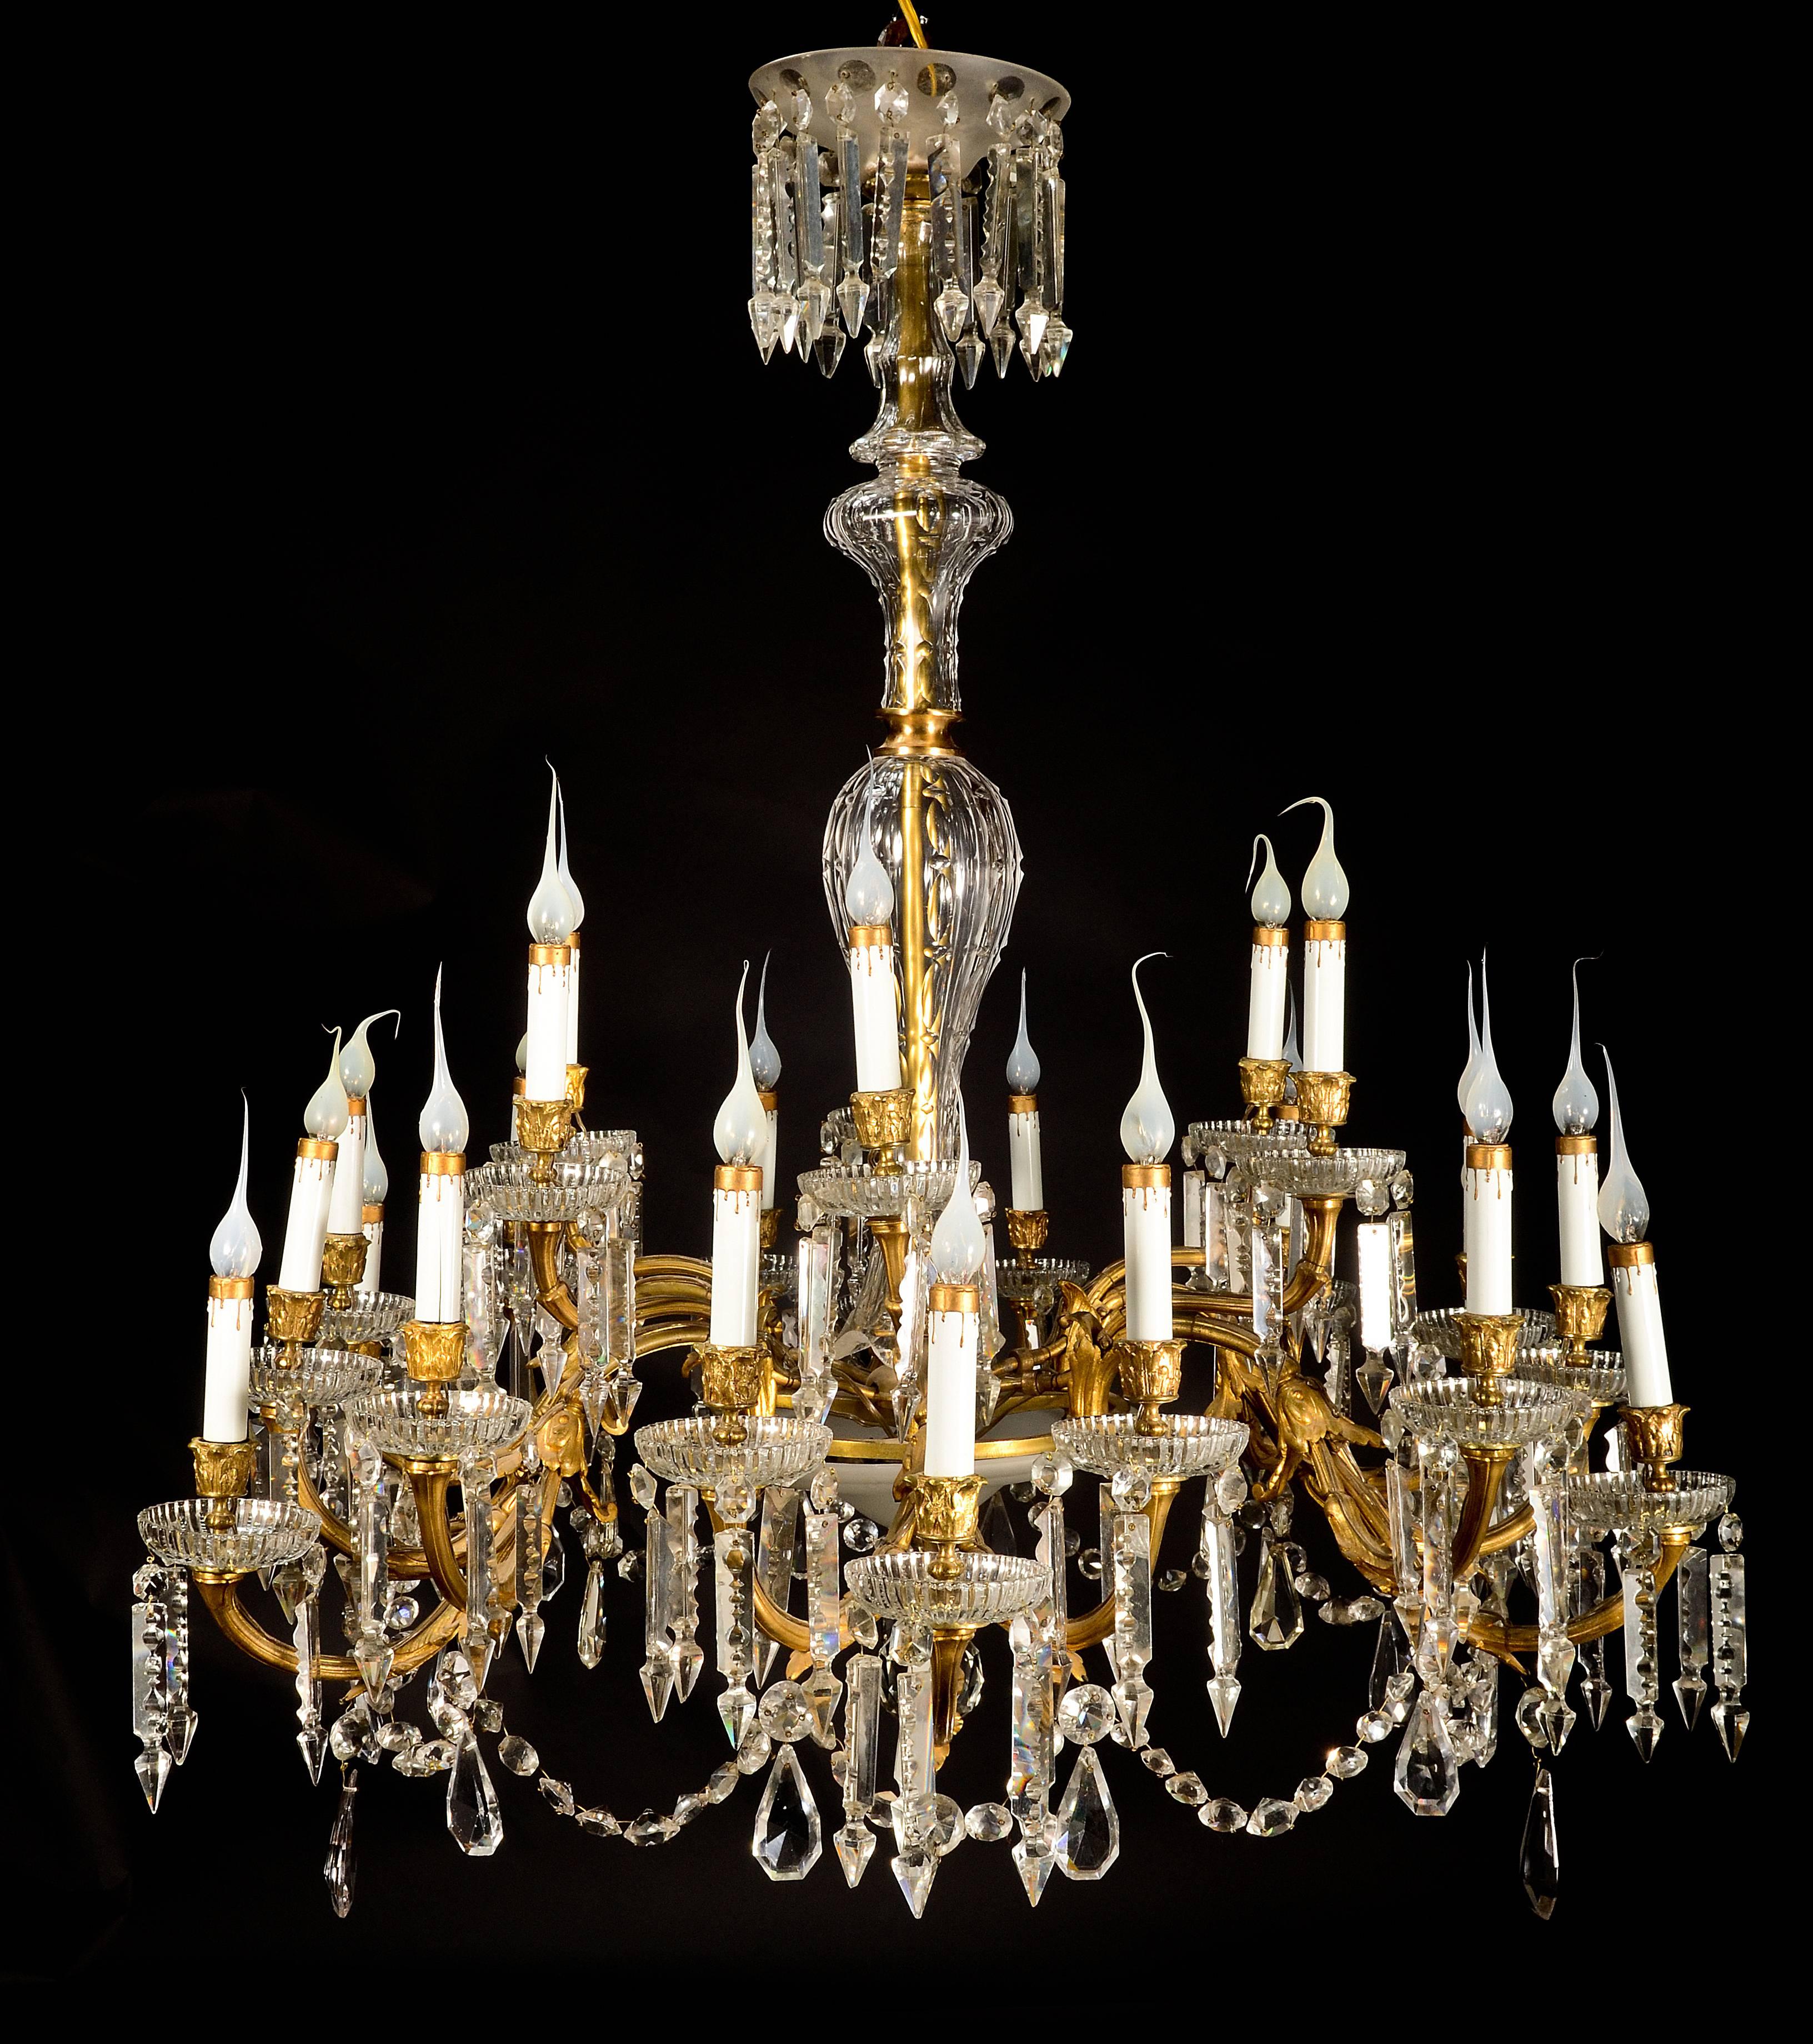 A large superb antique French Louis XVI style baccarat gilt bronze, frosted glass and cut crystal 24-arm triple tier chandelier of great quality embellished with cut crystal bolbeches, prisms, chains and a central cut crystal shaft.